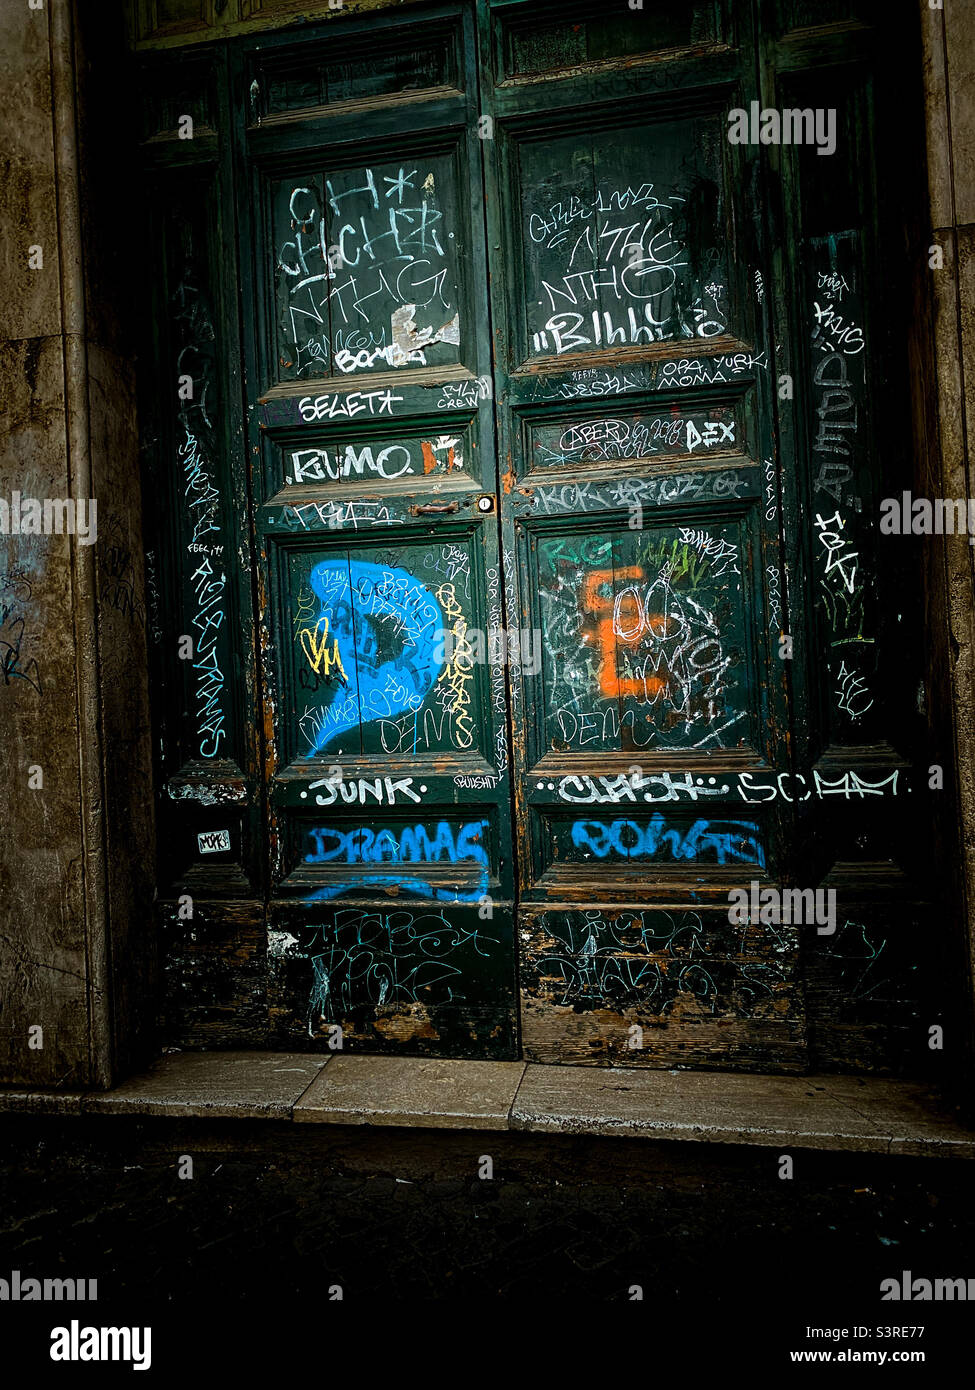 Abandoned doorway reclaimed with graffiti and urban art Stock Photo